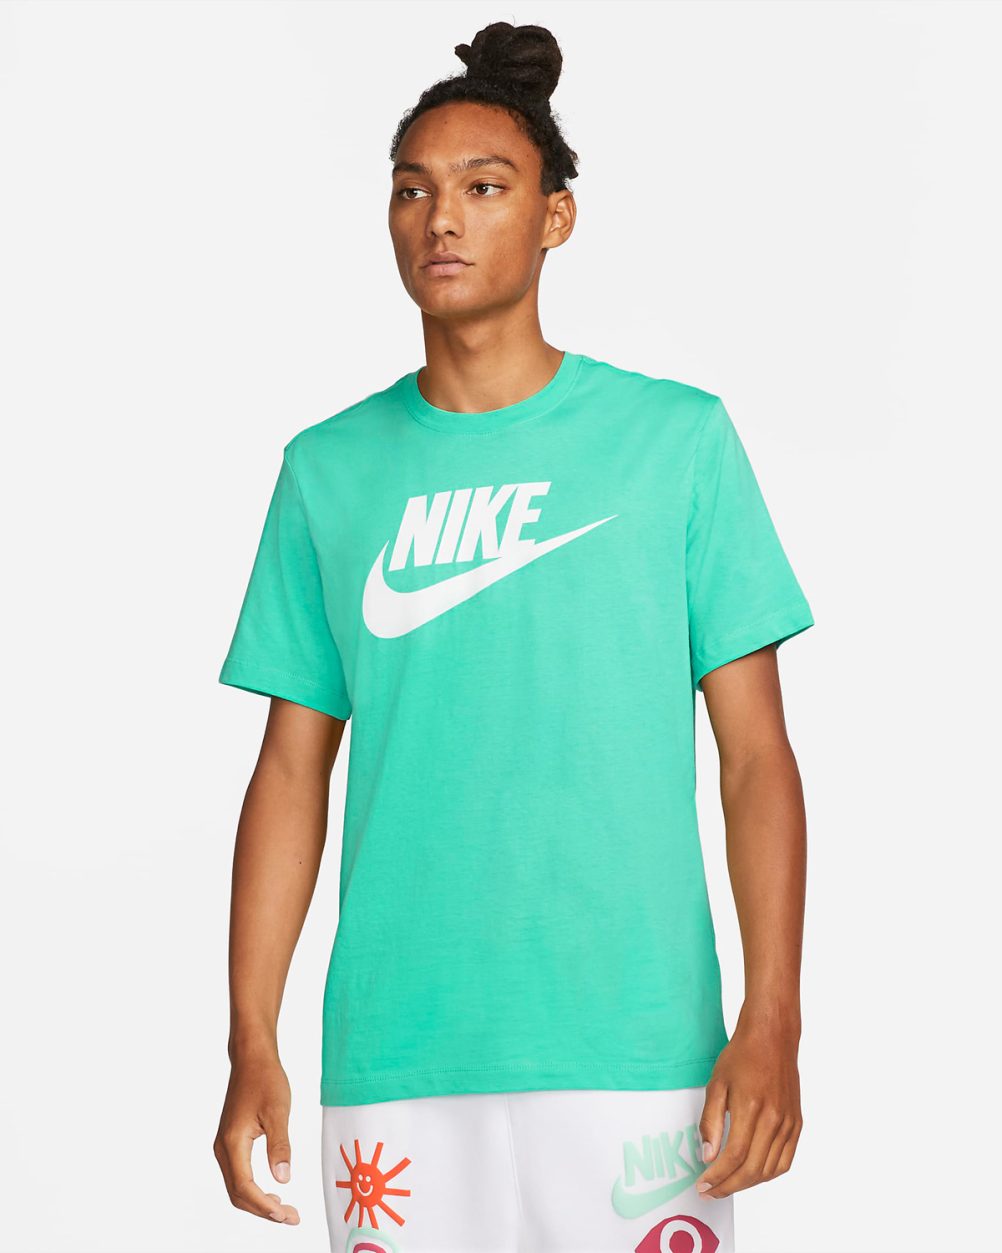 Nike Air Force 1 Low White Light Menta Shirts and Outfits